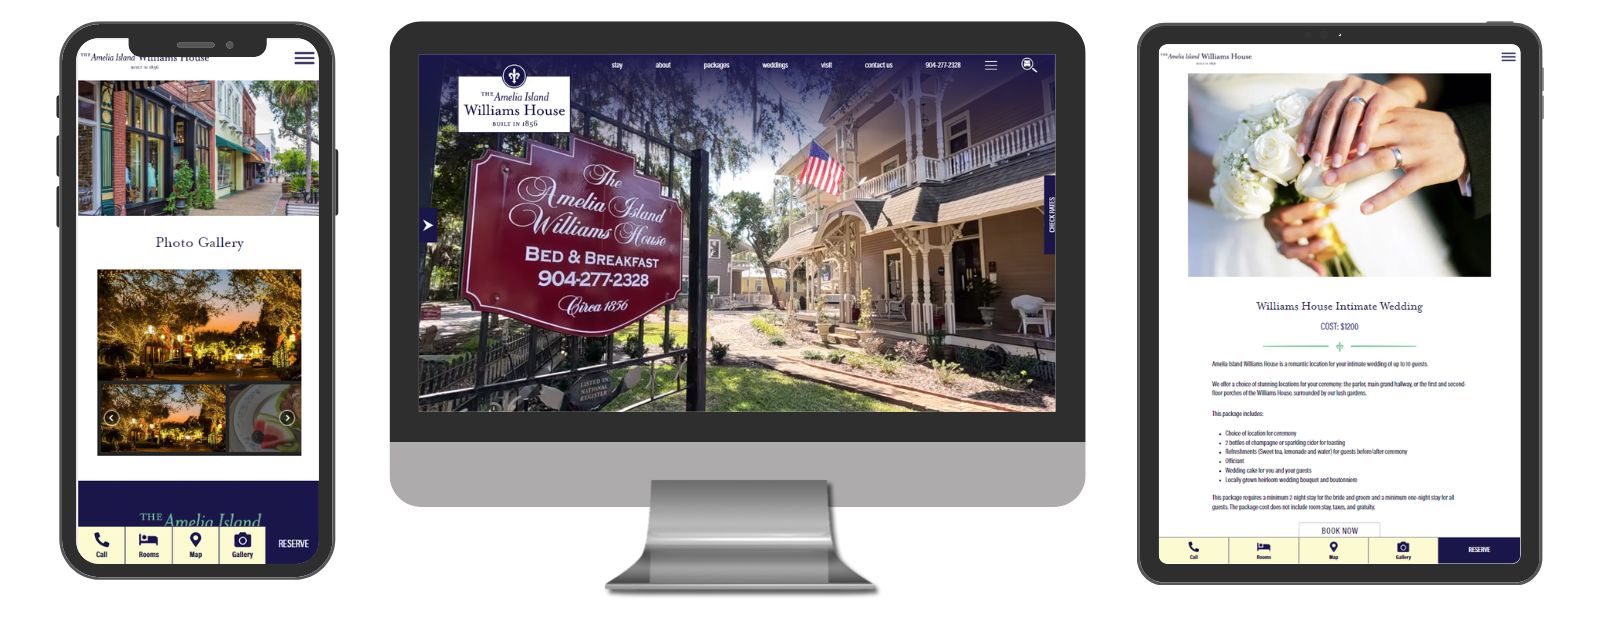 Mobile, template and desktop view of new website for Amelia Island Williams House